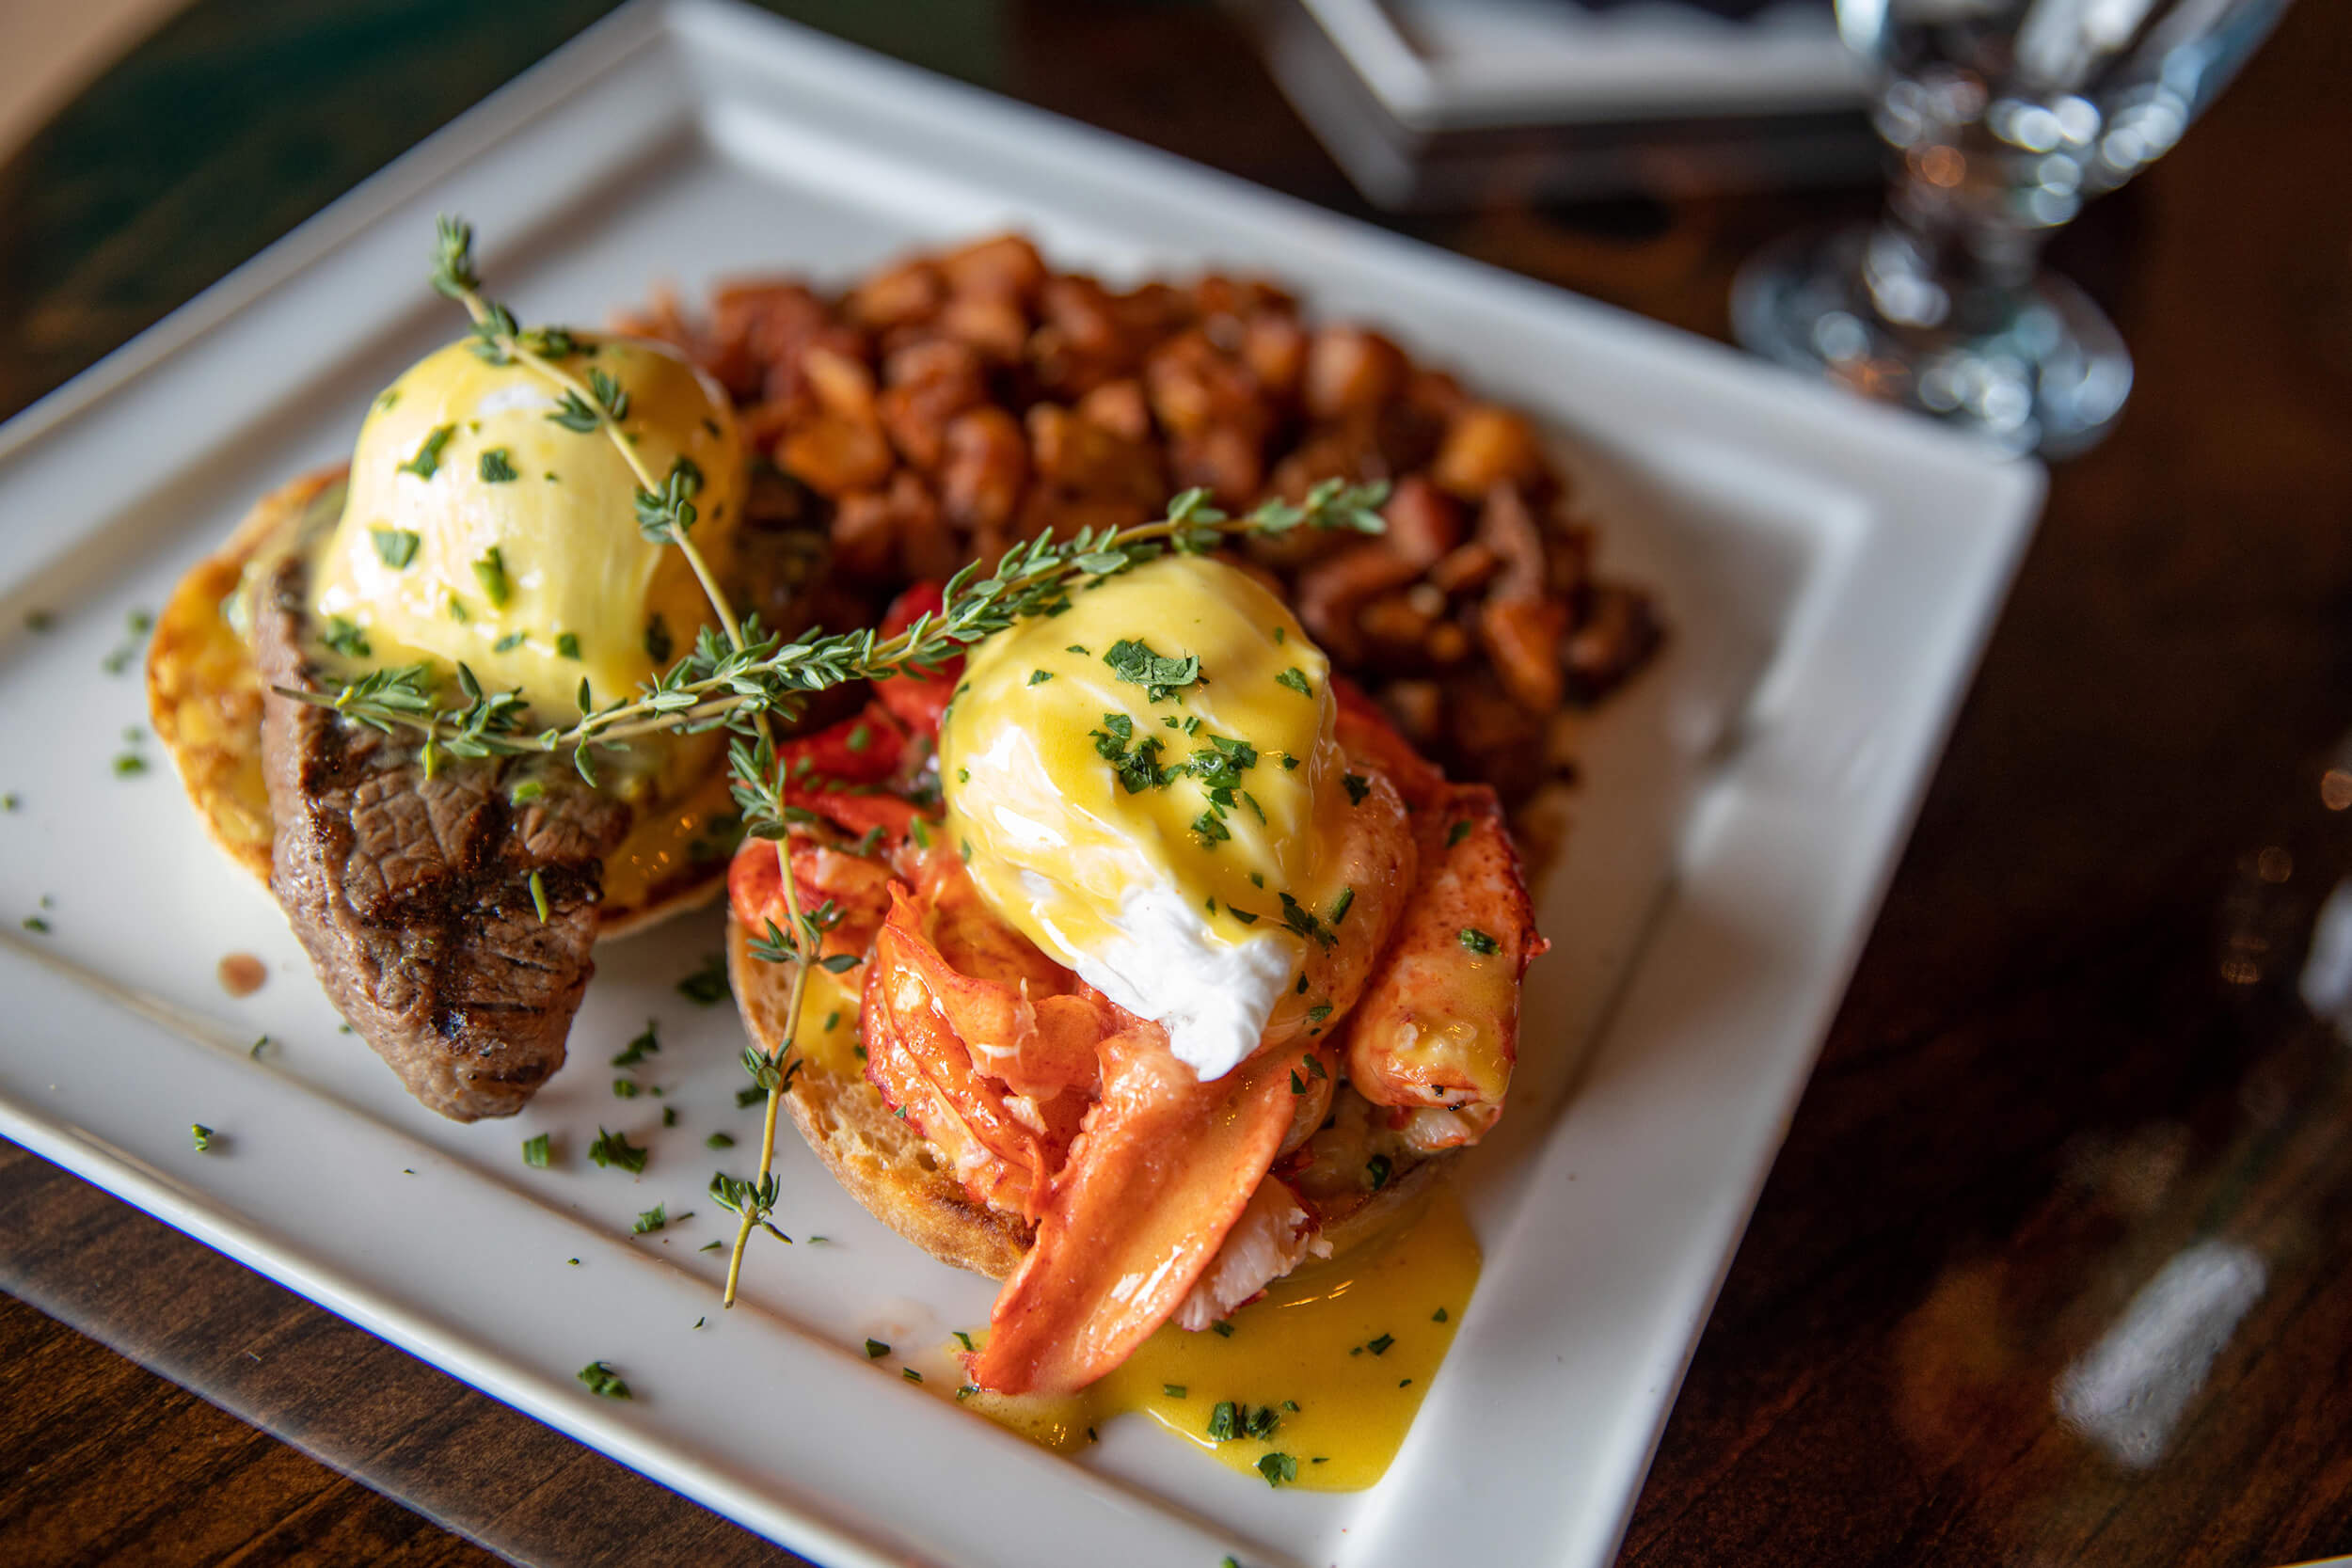 See What the Buzz Is About at This Highly-Rated Mystic Brunch Restaurant